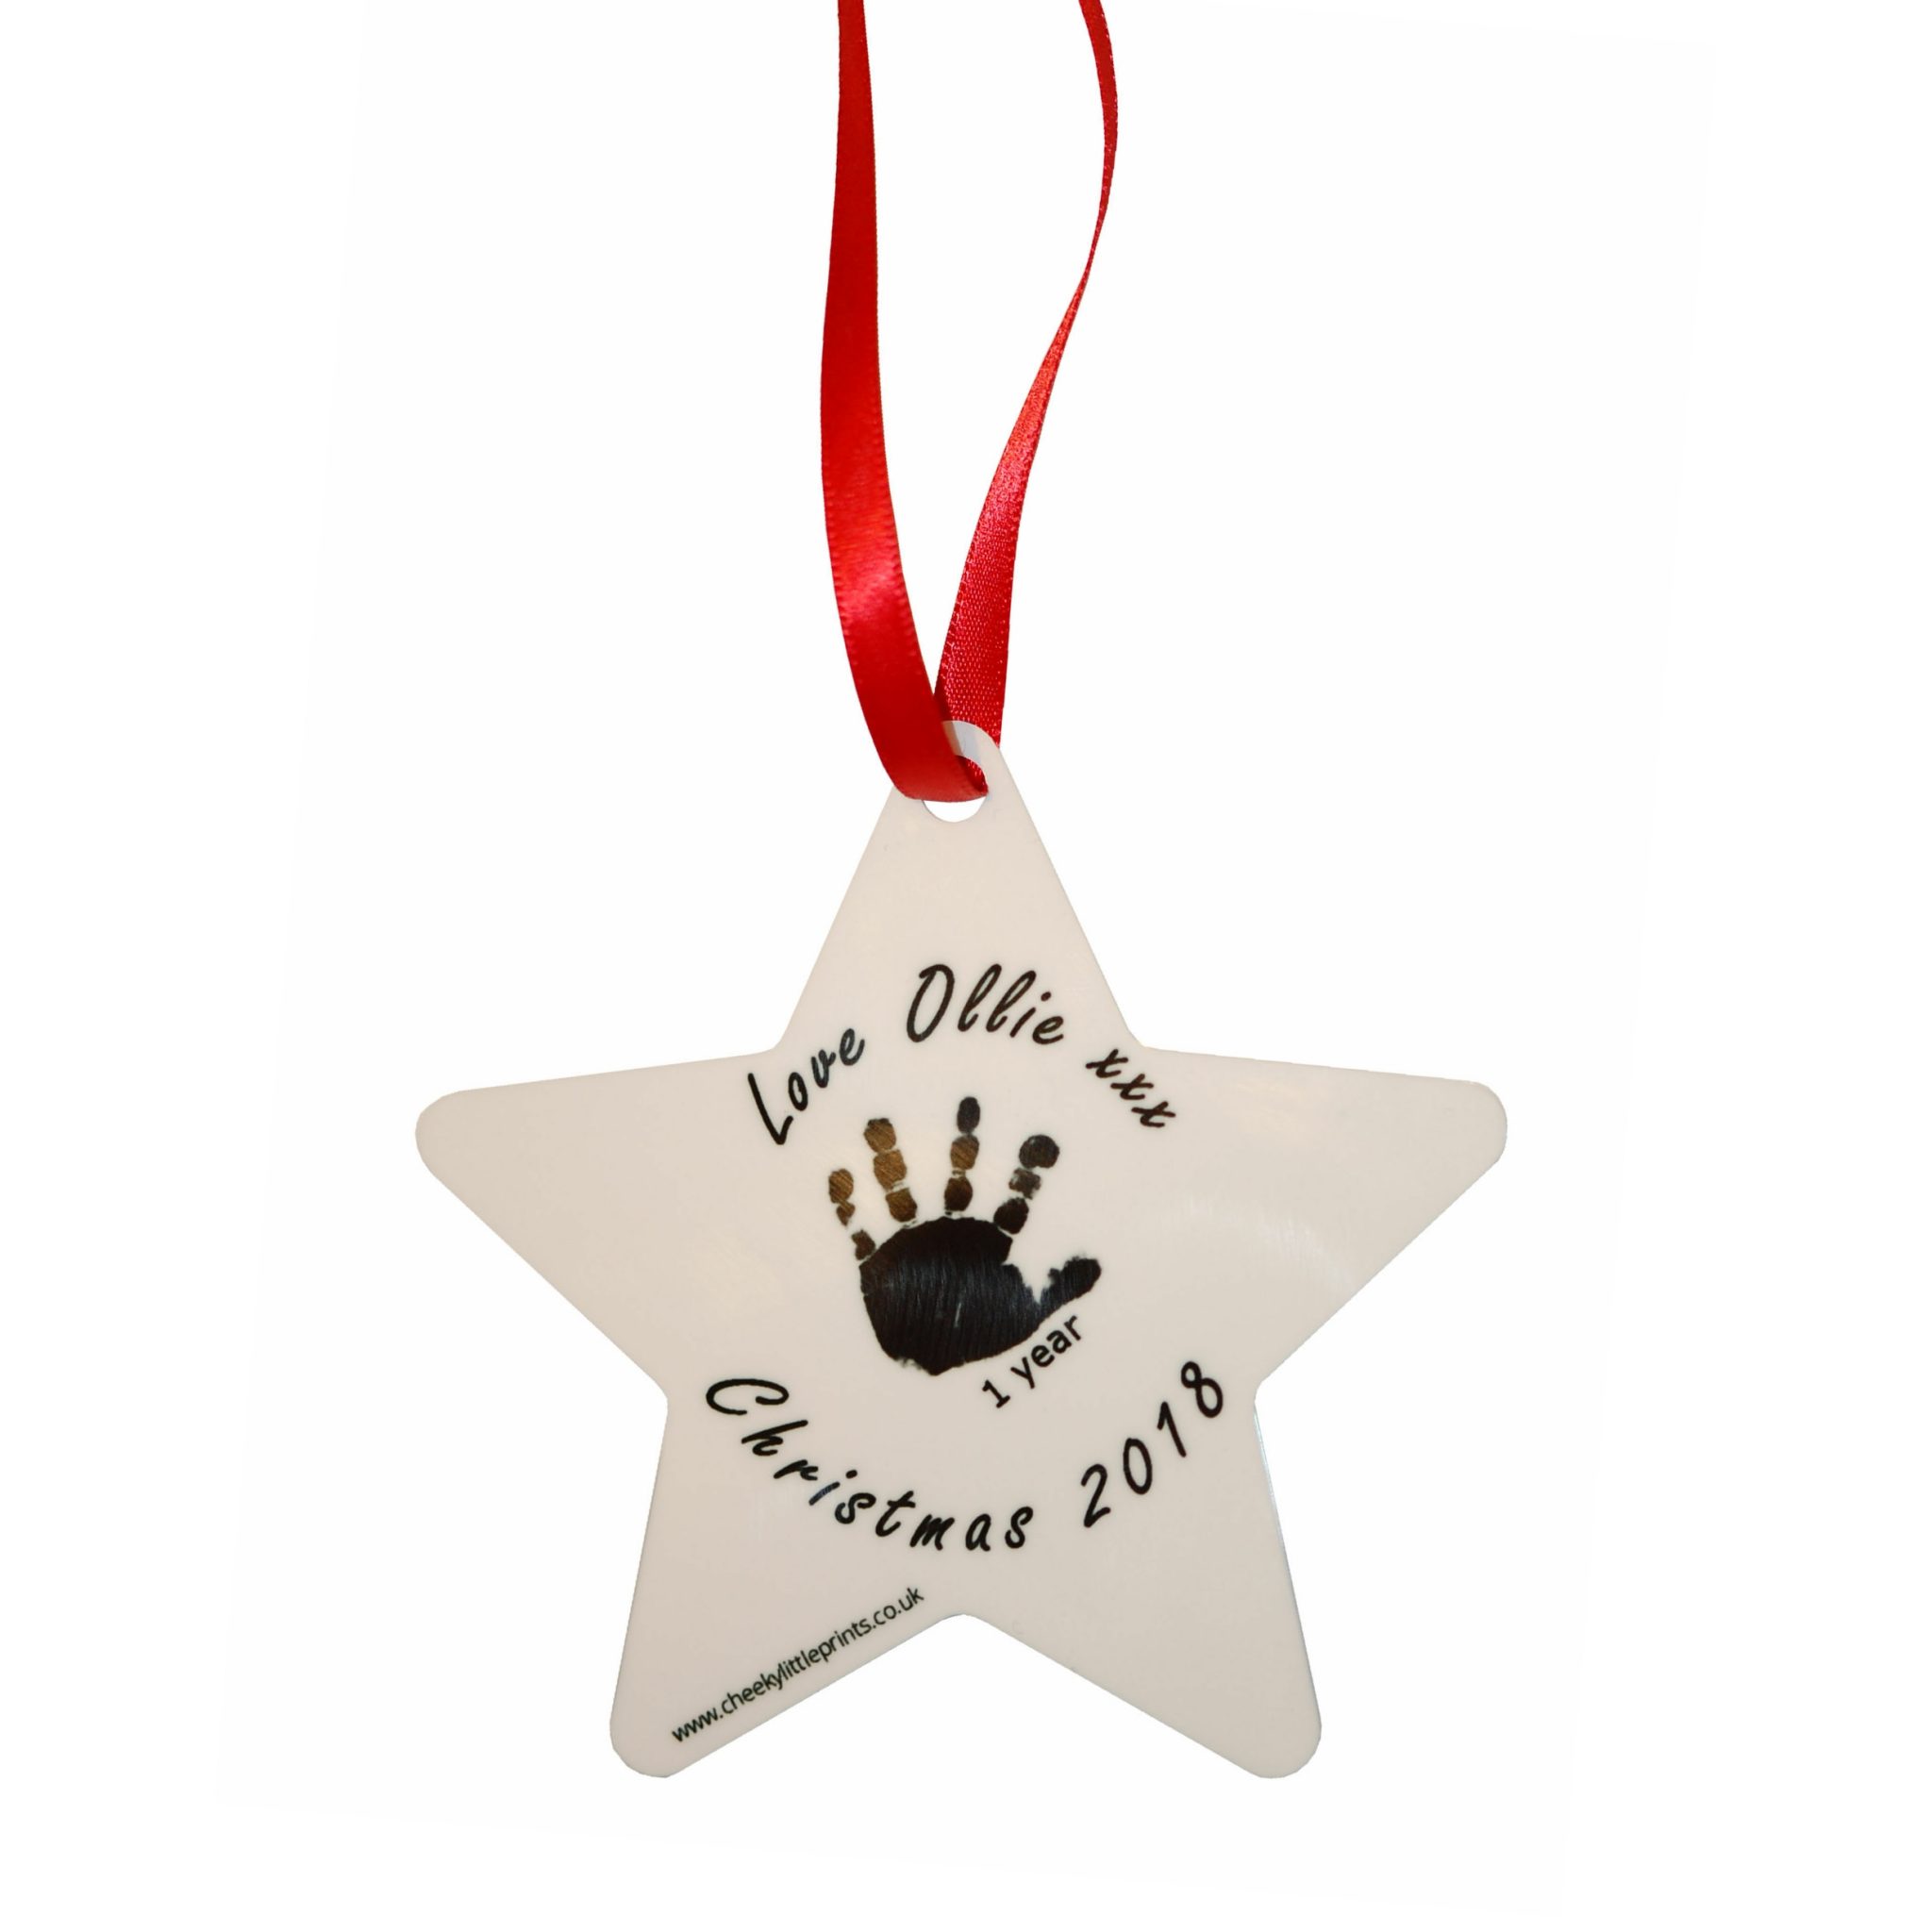 Personalised Christmas decoration wiht photo, handprint and special message